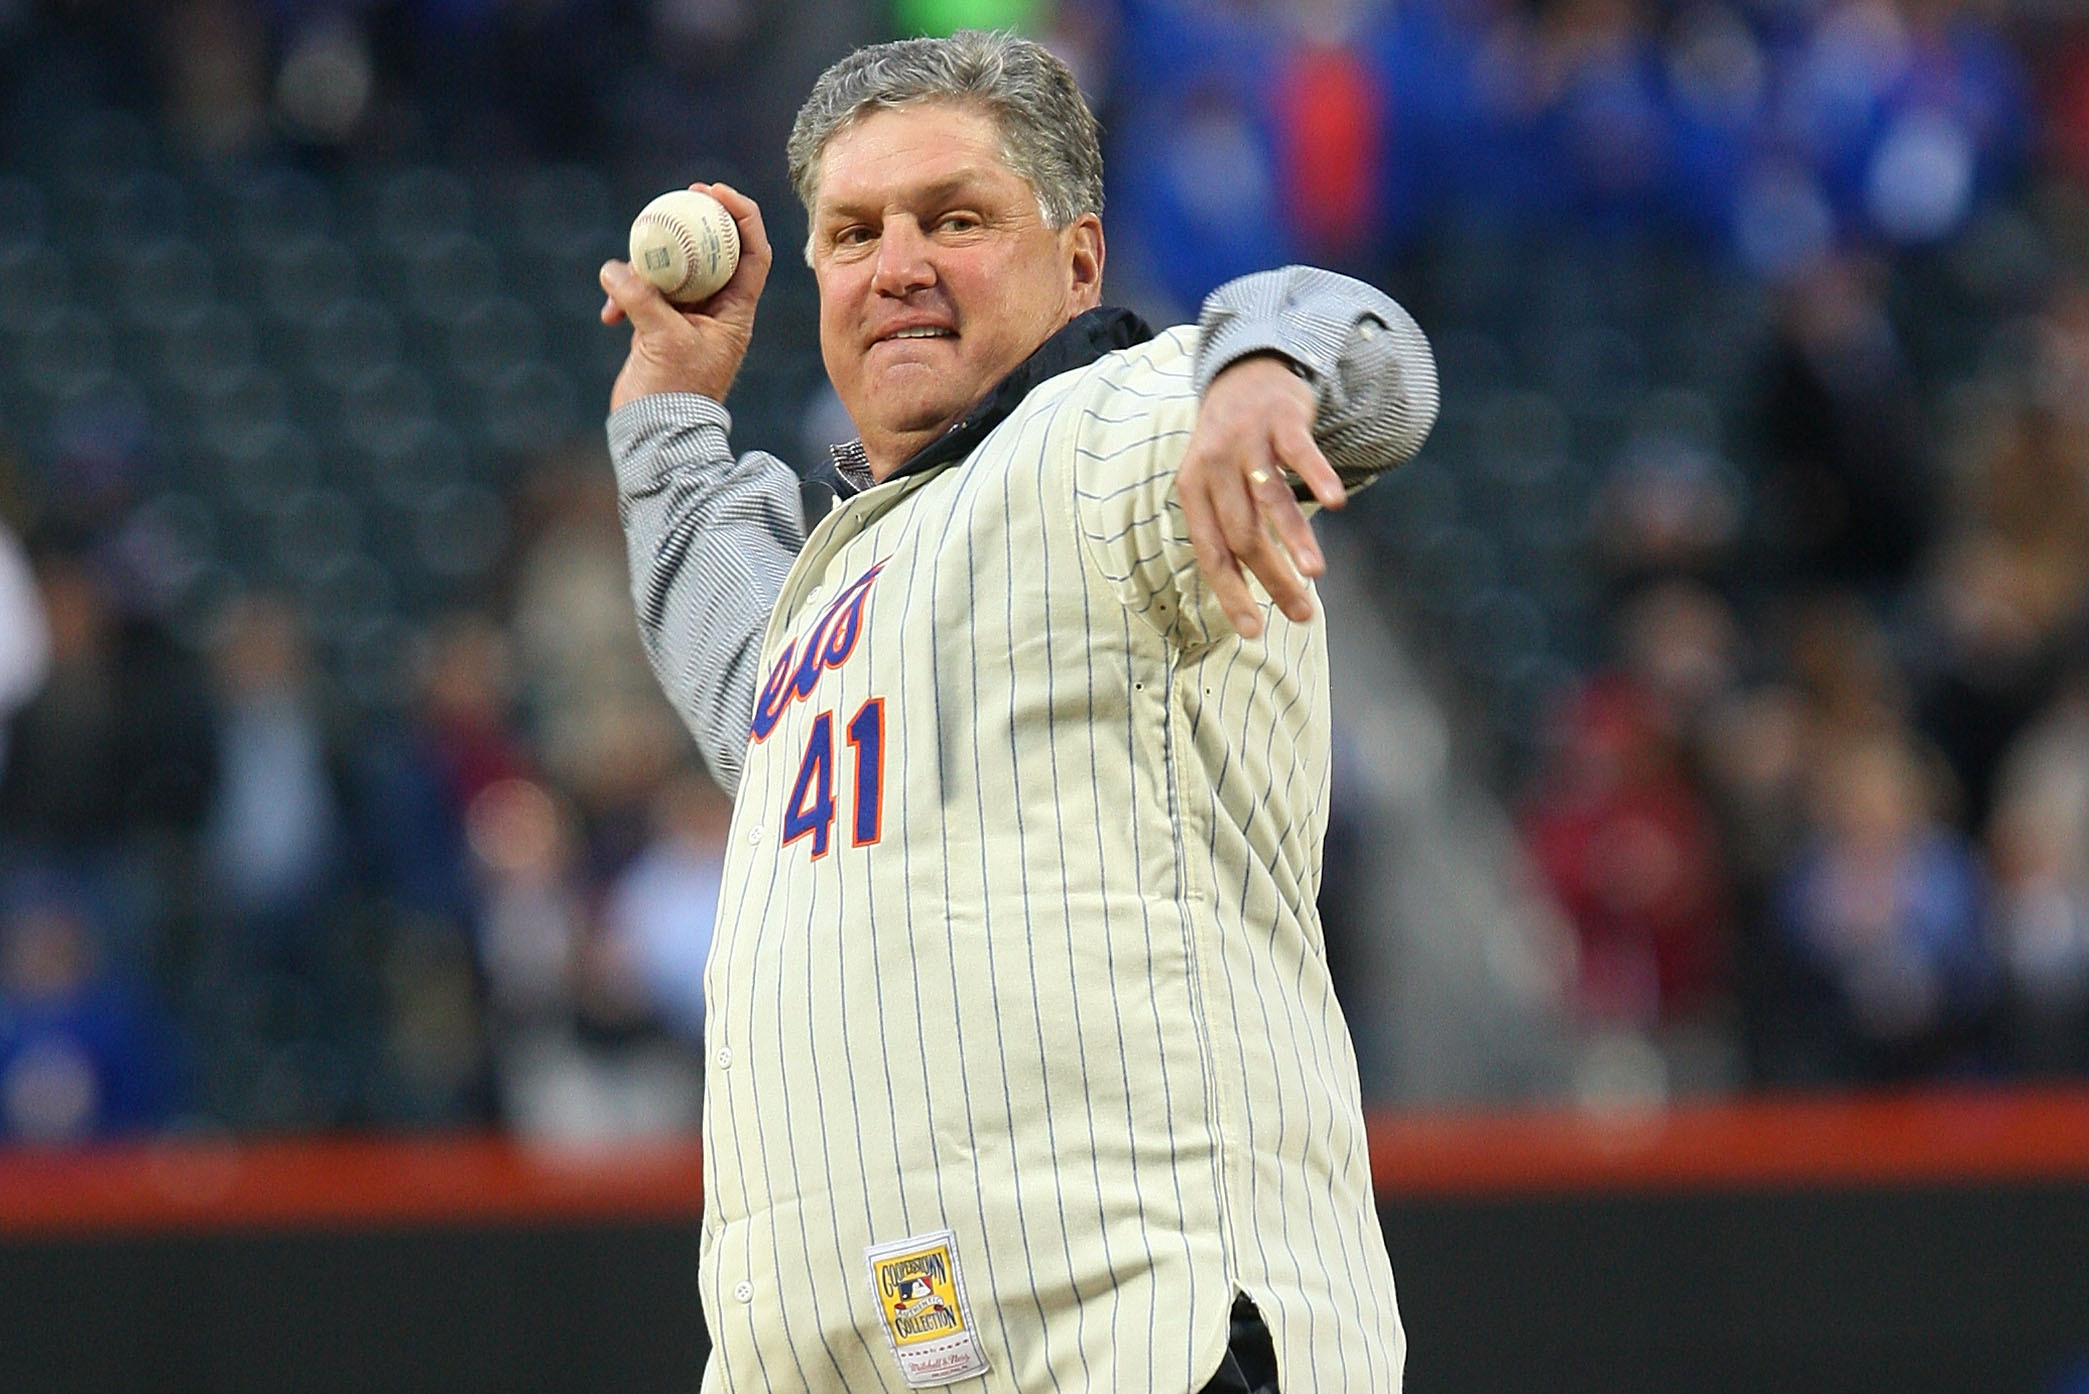 Tom Seaver diagnosed with dementia, retires from public life